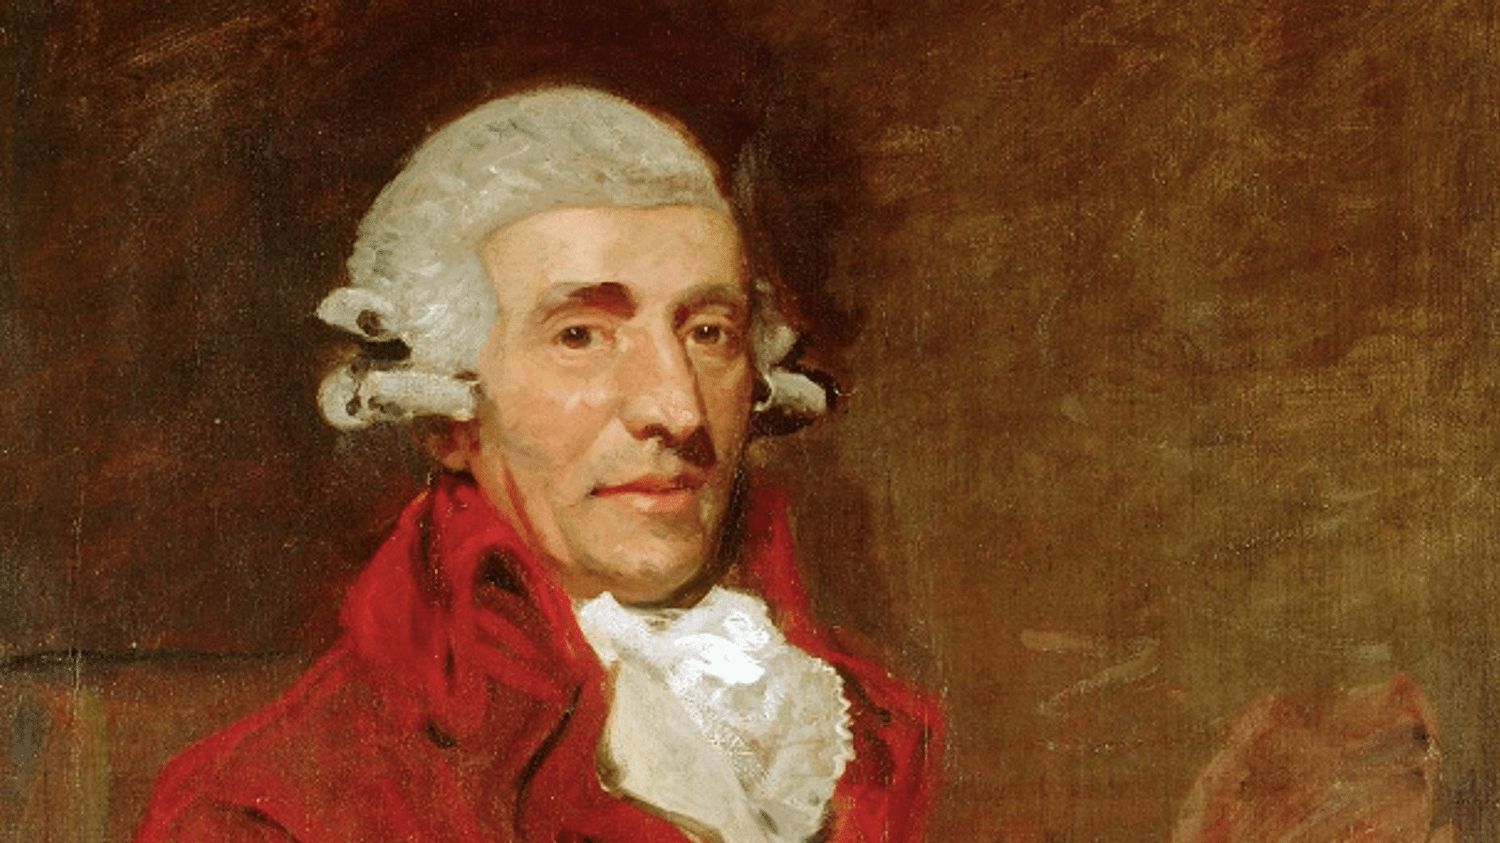 Haydn’S Patron Asked Him To Compose Chamber Music For What Instrument?